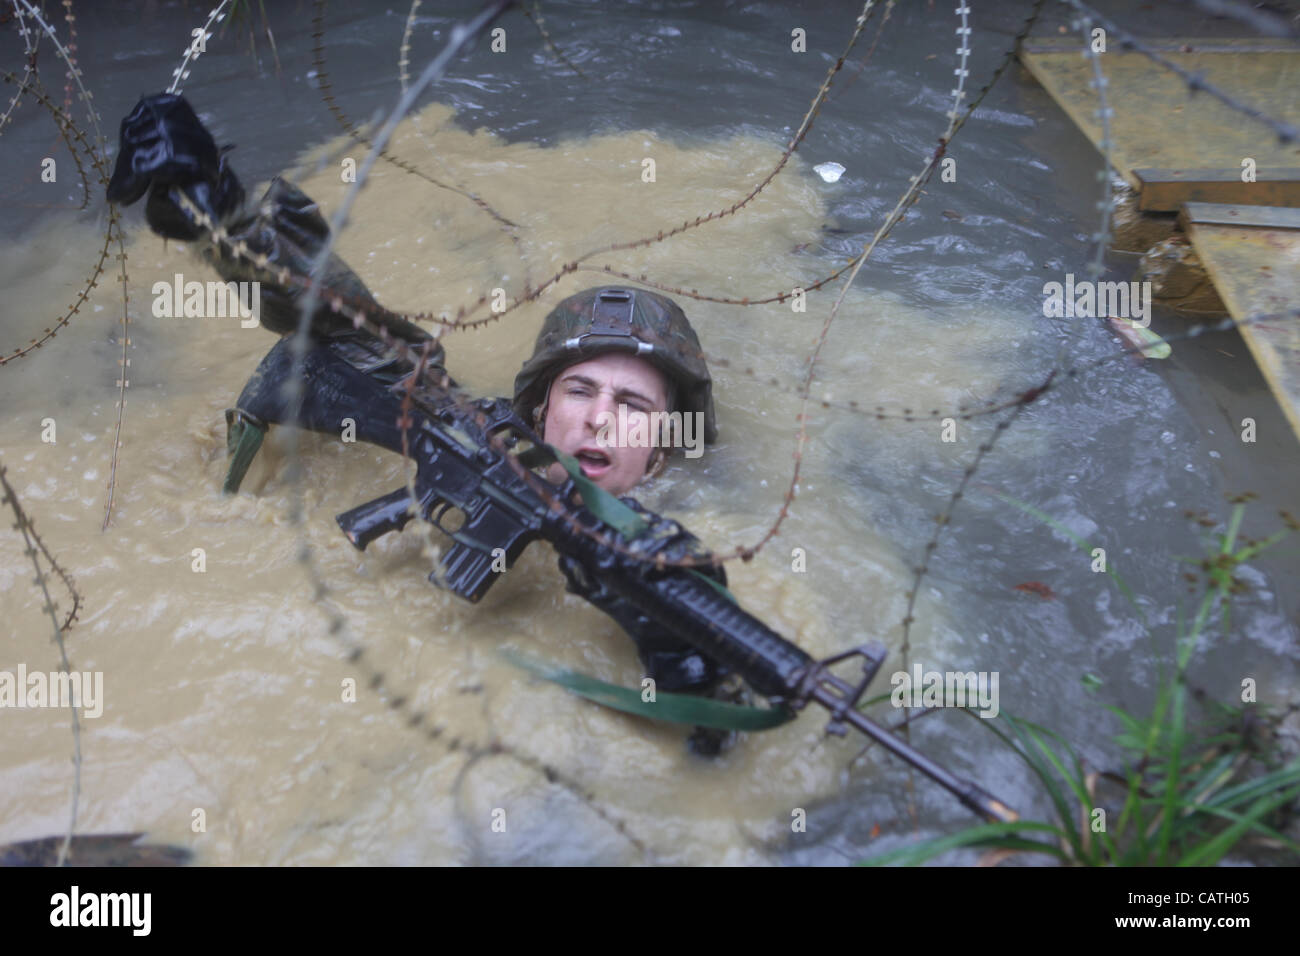 A US Marine crawls through a watery ditch and under concertina wire during the Jungle Endurance Course April 20, 2012 in Okinawa, Japan. Stock Photo